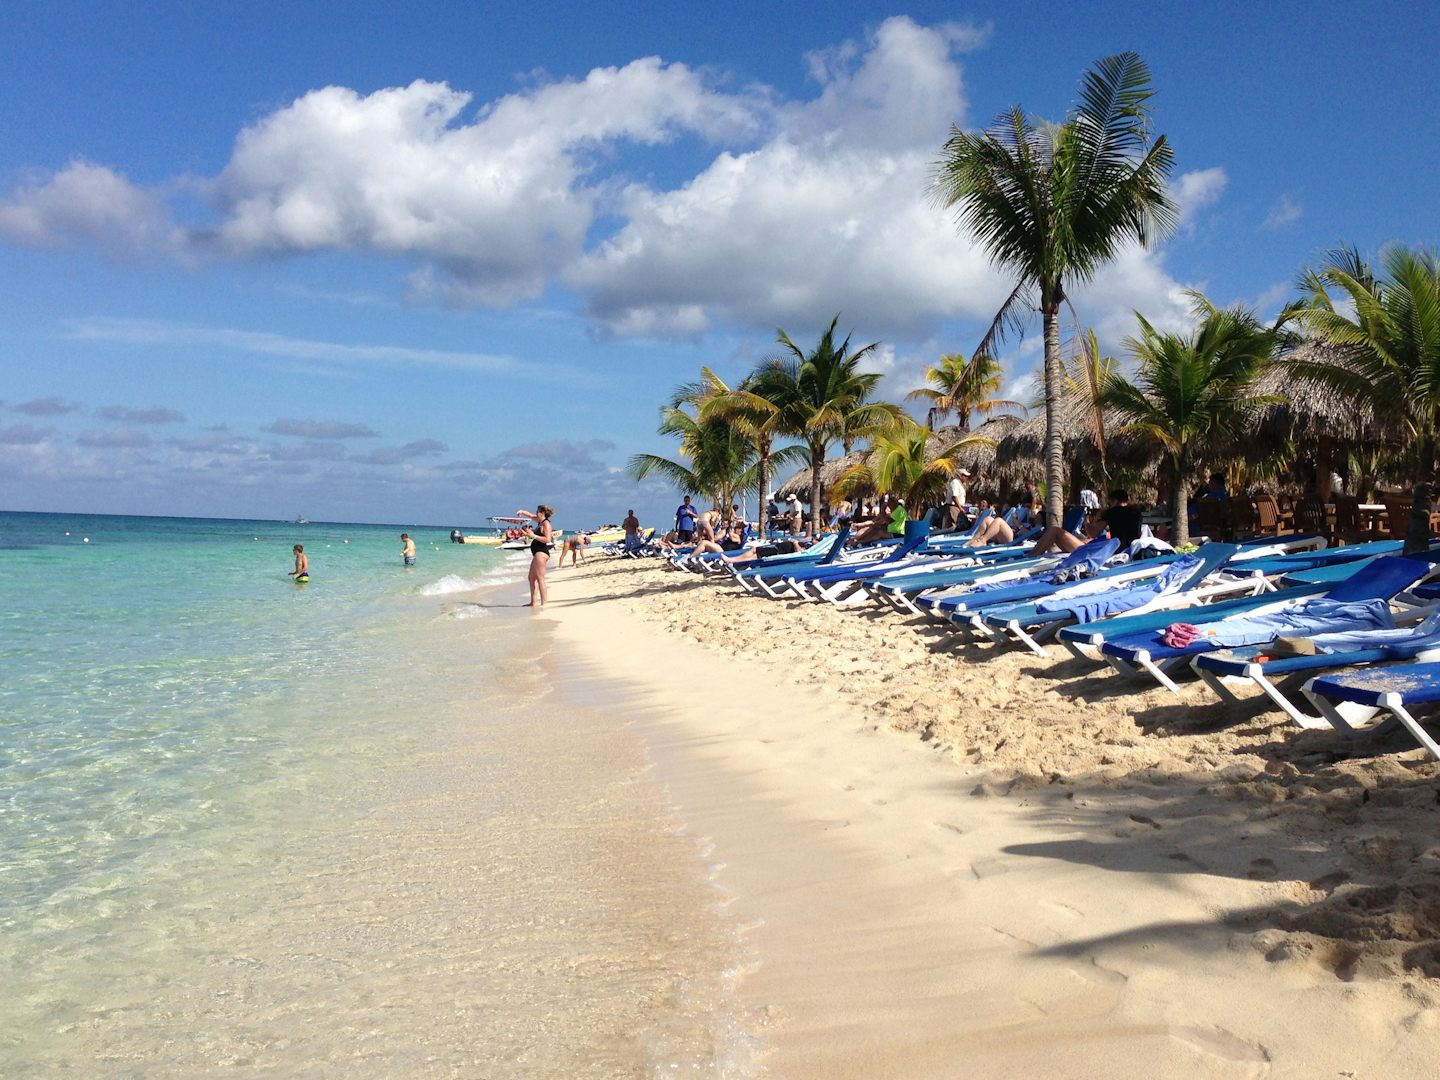 Cozumel: Mr. Sanchos beach area. Super fun. Make reservations in advance, taxi $17 each way, plus tip.